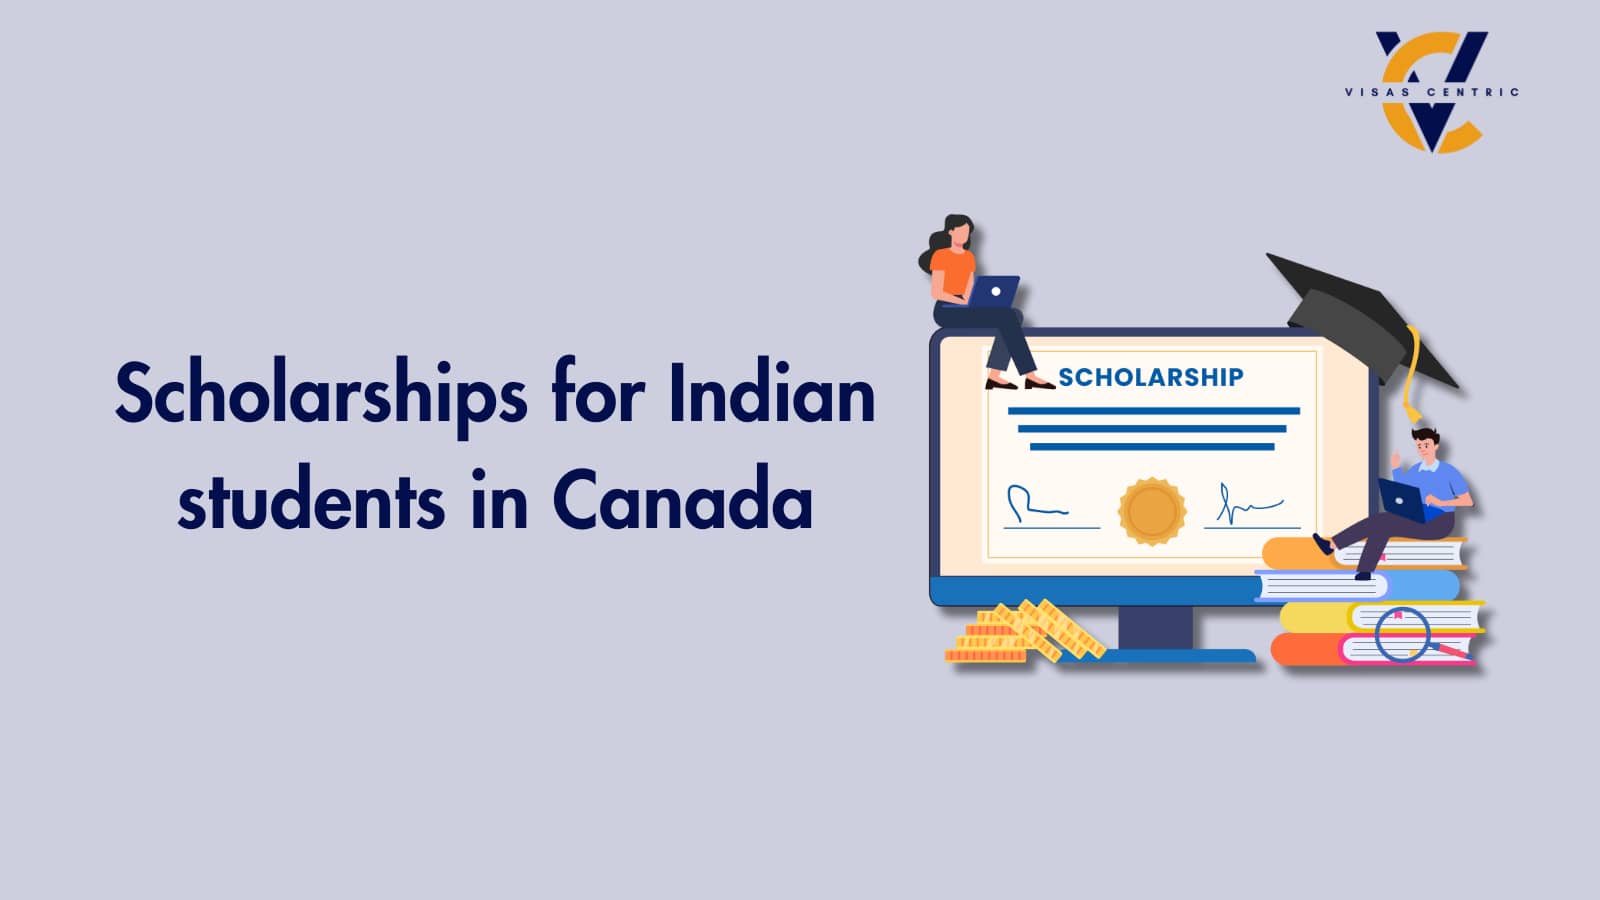 Scholarships for Indian students in Canada